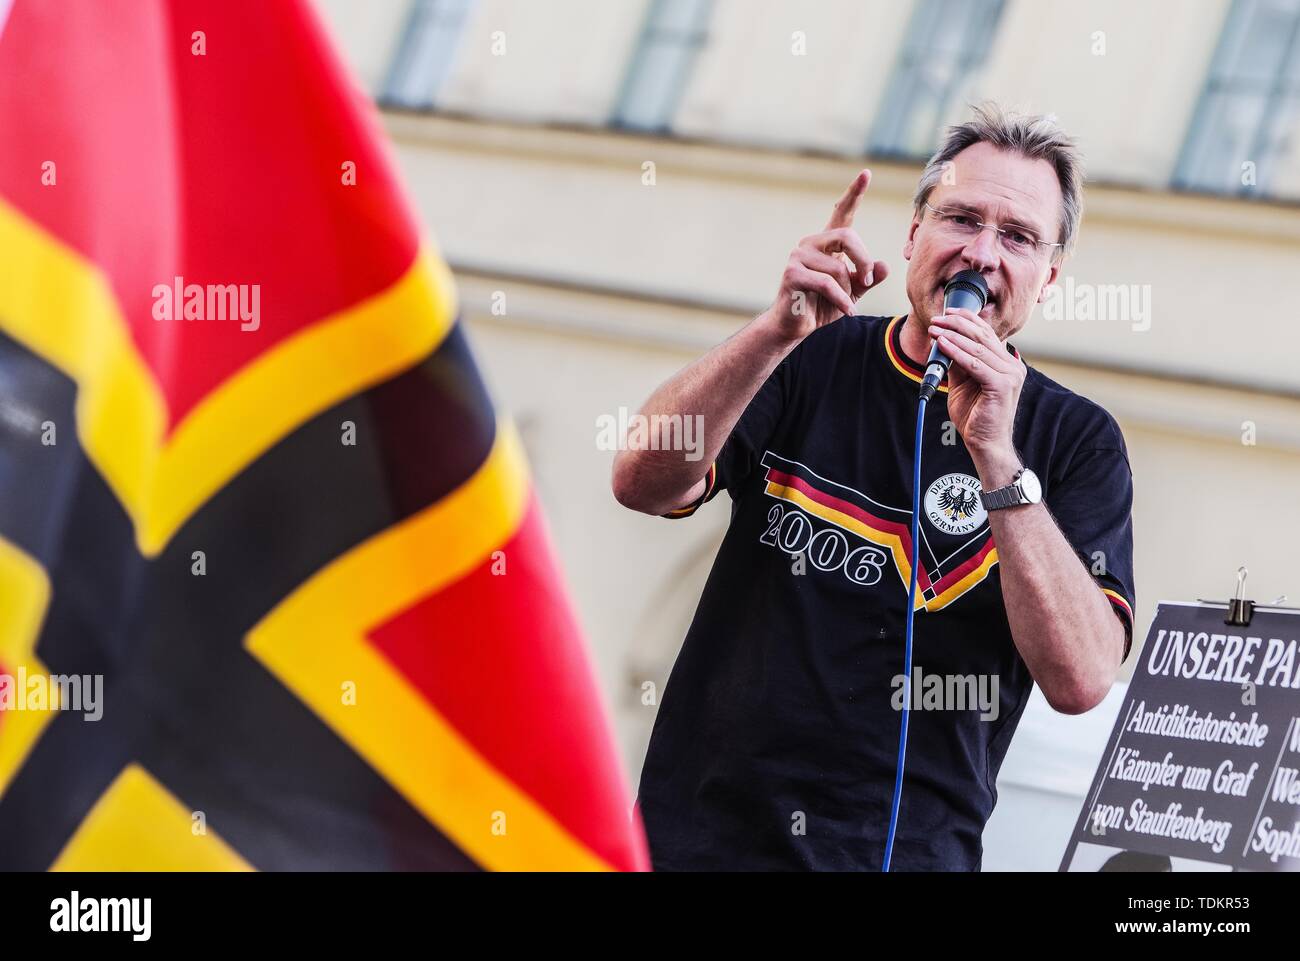 Munich, Bavaria, Germany. 17th June, 2019. MICHAEL STUERZENBERGER appearing at a Buergerbewegung Pax Europa far-right demonstration in Munich, Germany with the symbolic Wirmer flag in the foreground. Headed by the Verfassungsschutz (Secret Service) monitored Michael Stuerzenberger, the Buergerbewegung Pax Europa (Citizen Initiative Pax Europa) islamophobic group marched through the University area of Munich, Germany. Despite claiming to be for Judeo-Christian culture, the group had numerous known anti-semites, anti-semitic conspiracy theorists, and right-extremists among their 50 followers. Cr Stock Photo